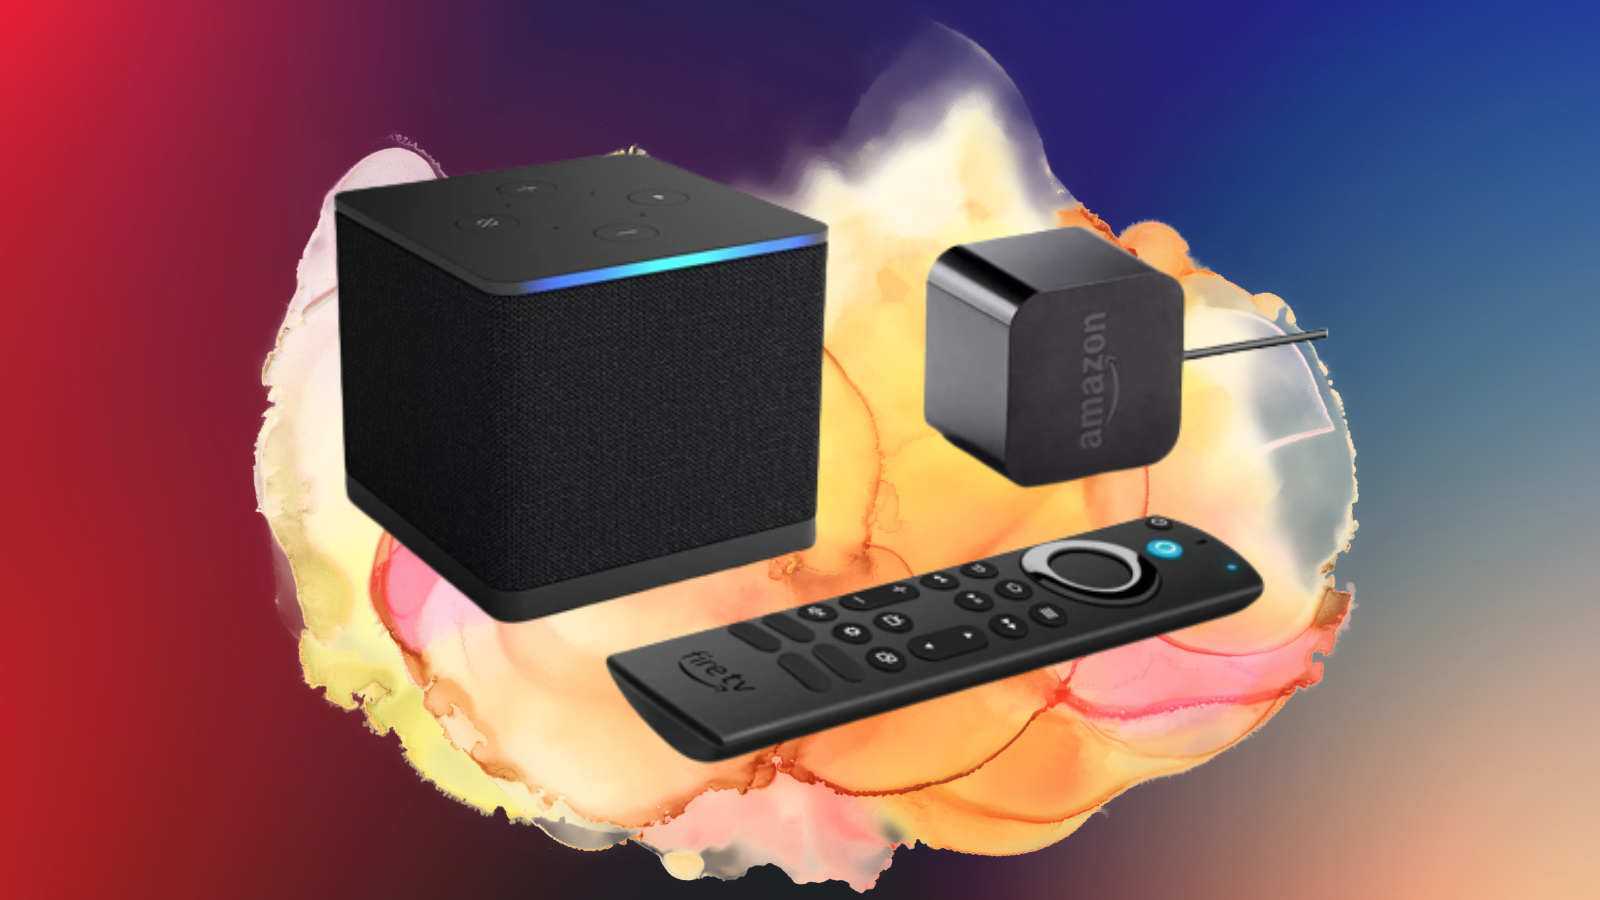 amazon fire tv cube 4k with remote and power adapter with blue and orange background